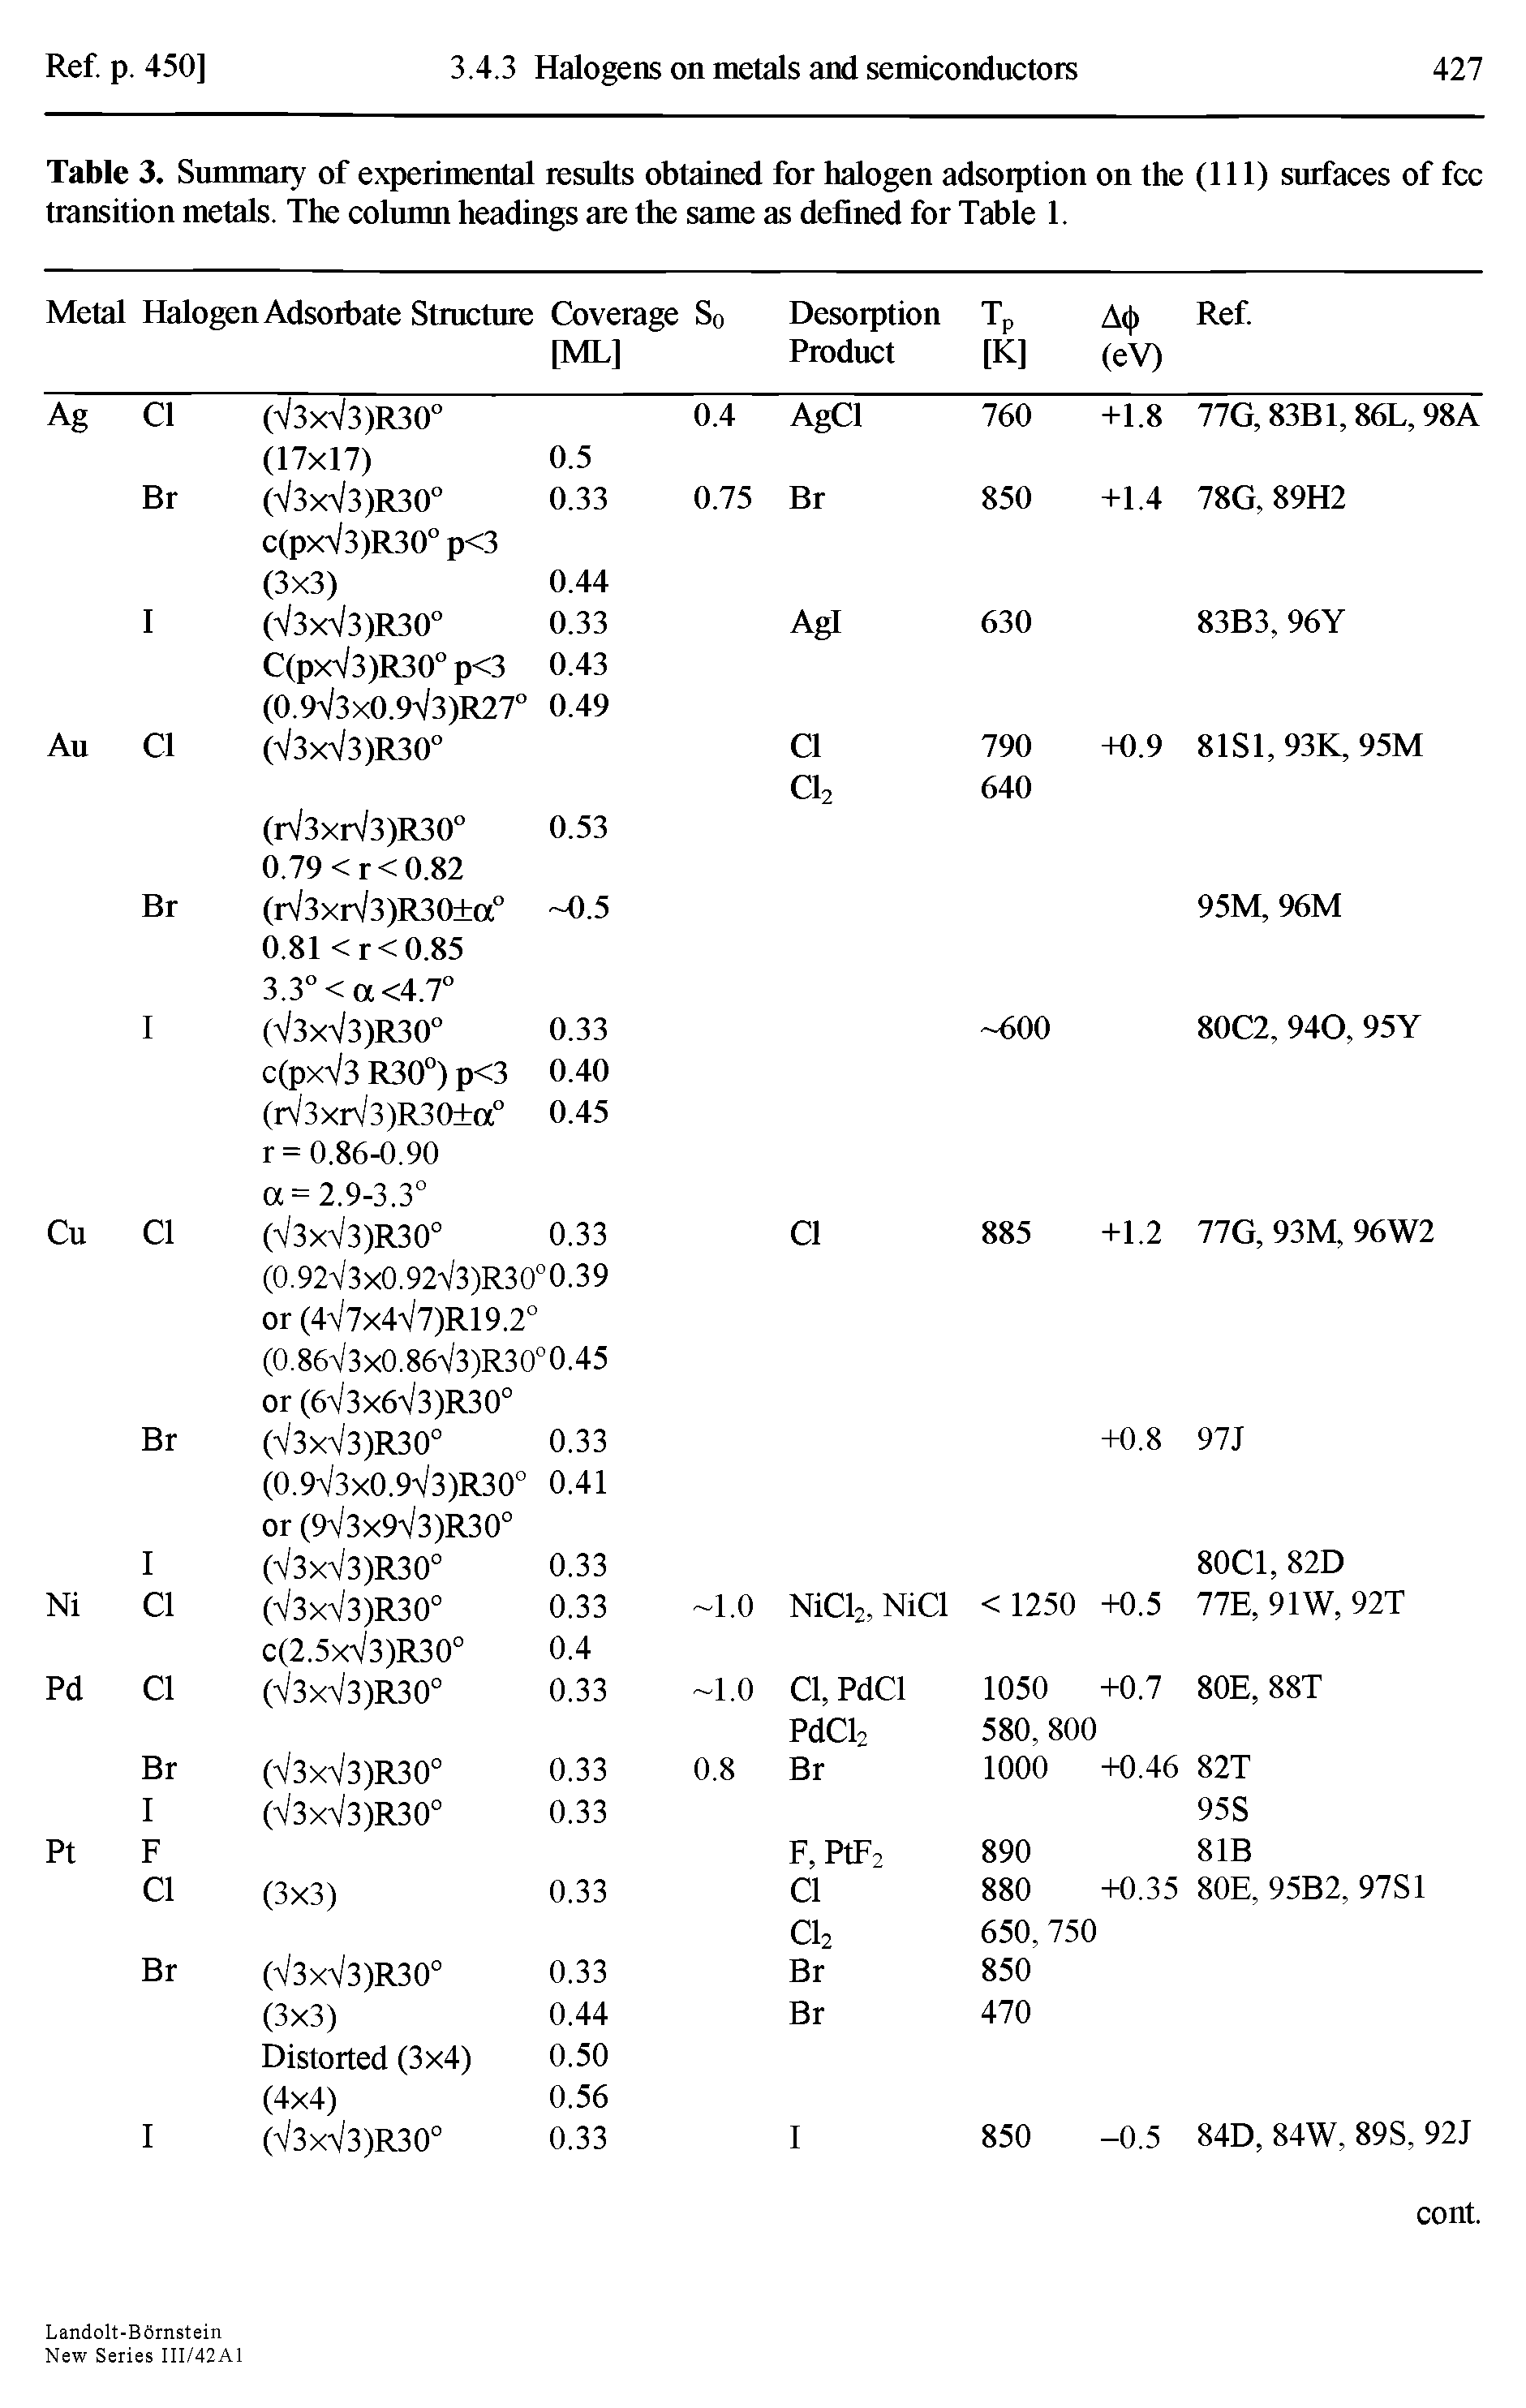 Table 3. Summary of experimental results obtained for halogen adsorption on the (111) surfaces of fee transition metals. The colunrn headings are the same as defined for Table 1.